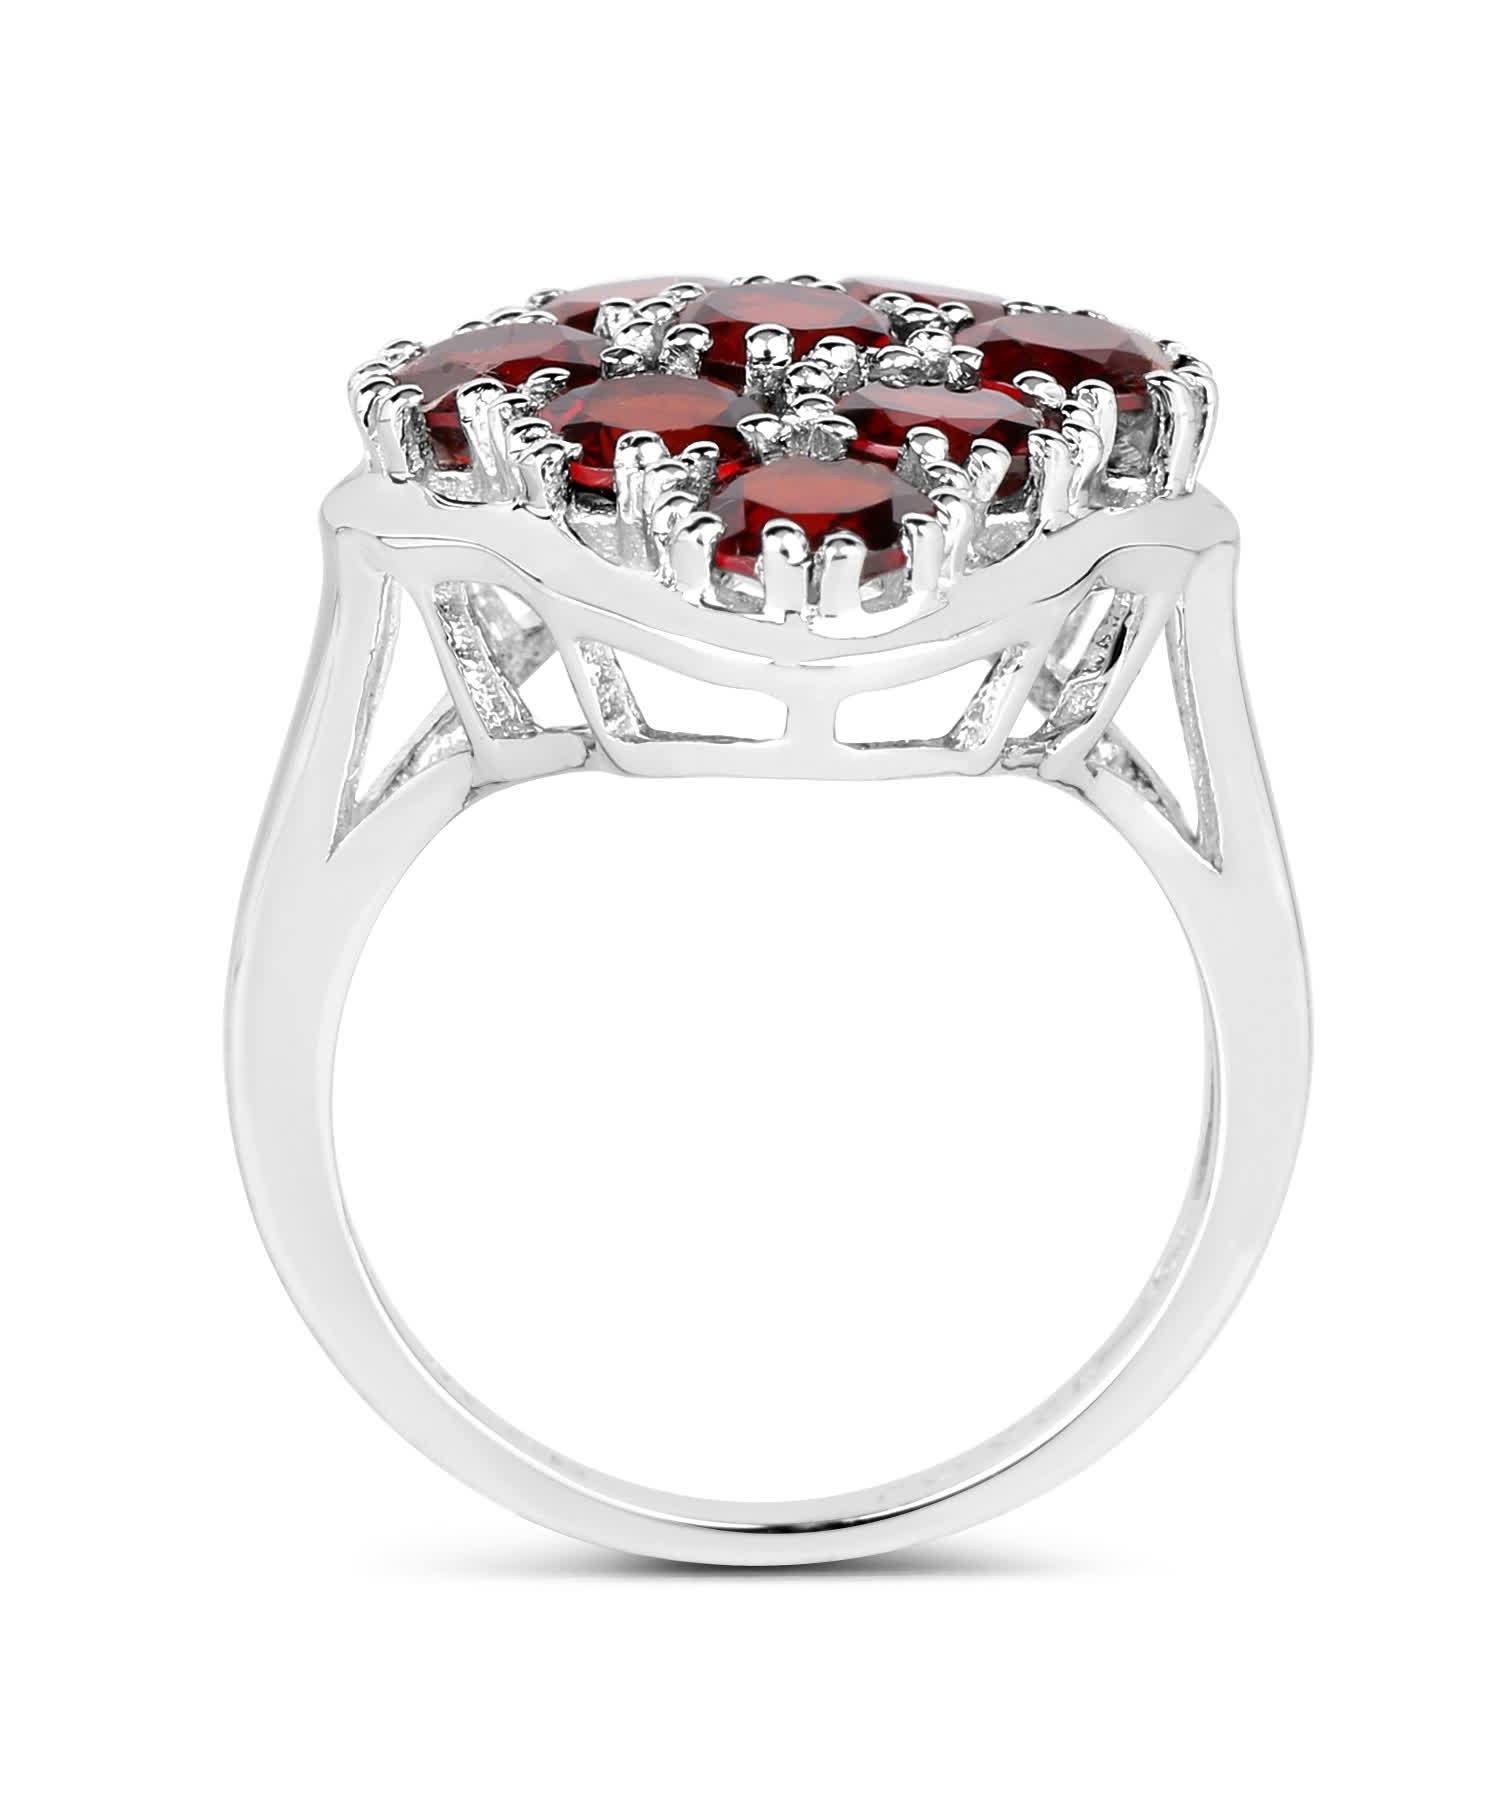 5.22ctw Natural Pomegranate Garnet Rhodium Plated 925 Sterling Silver Right Hand Ring View 2